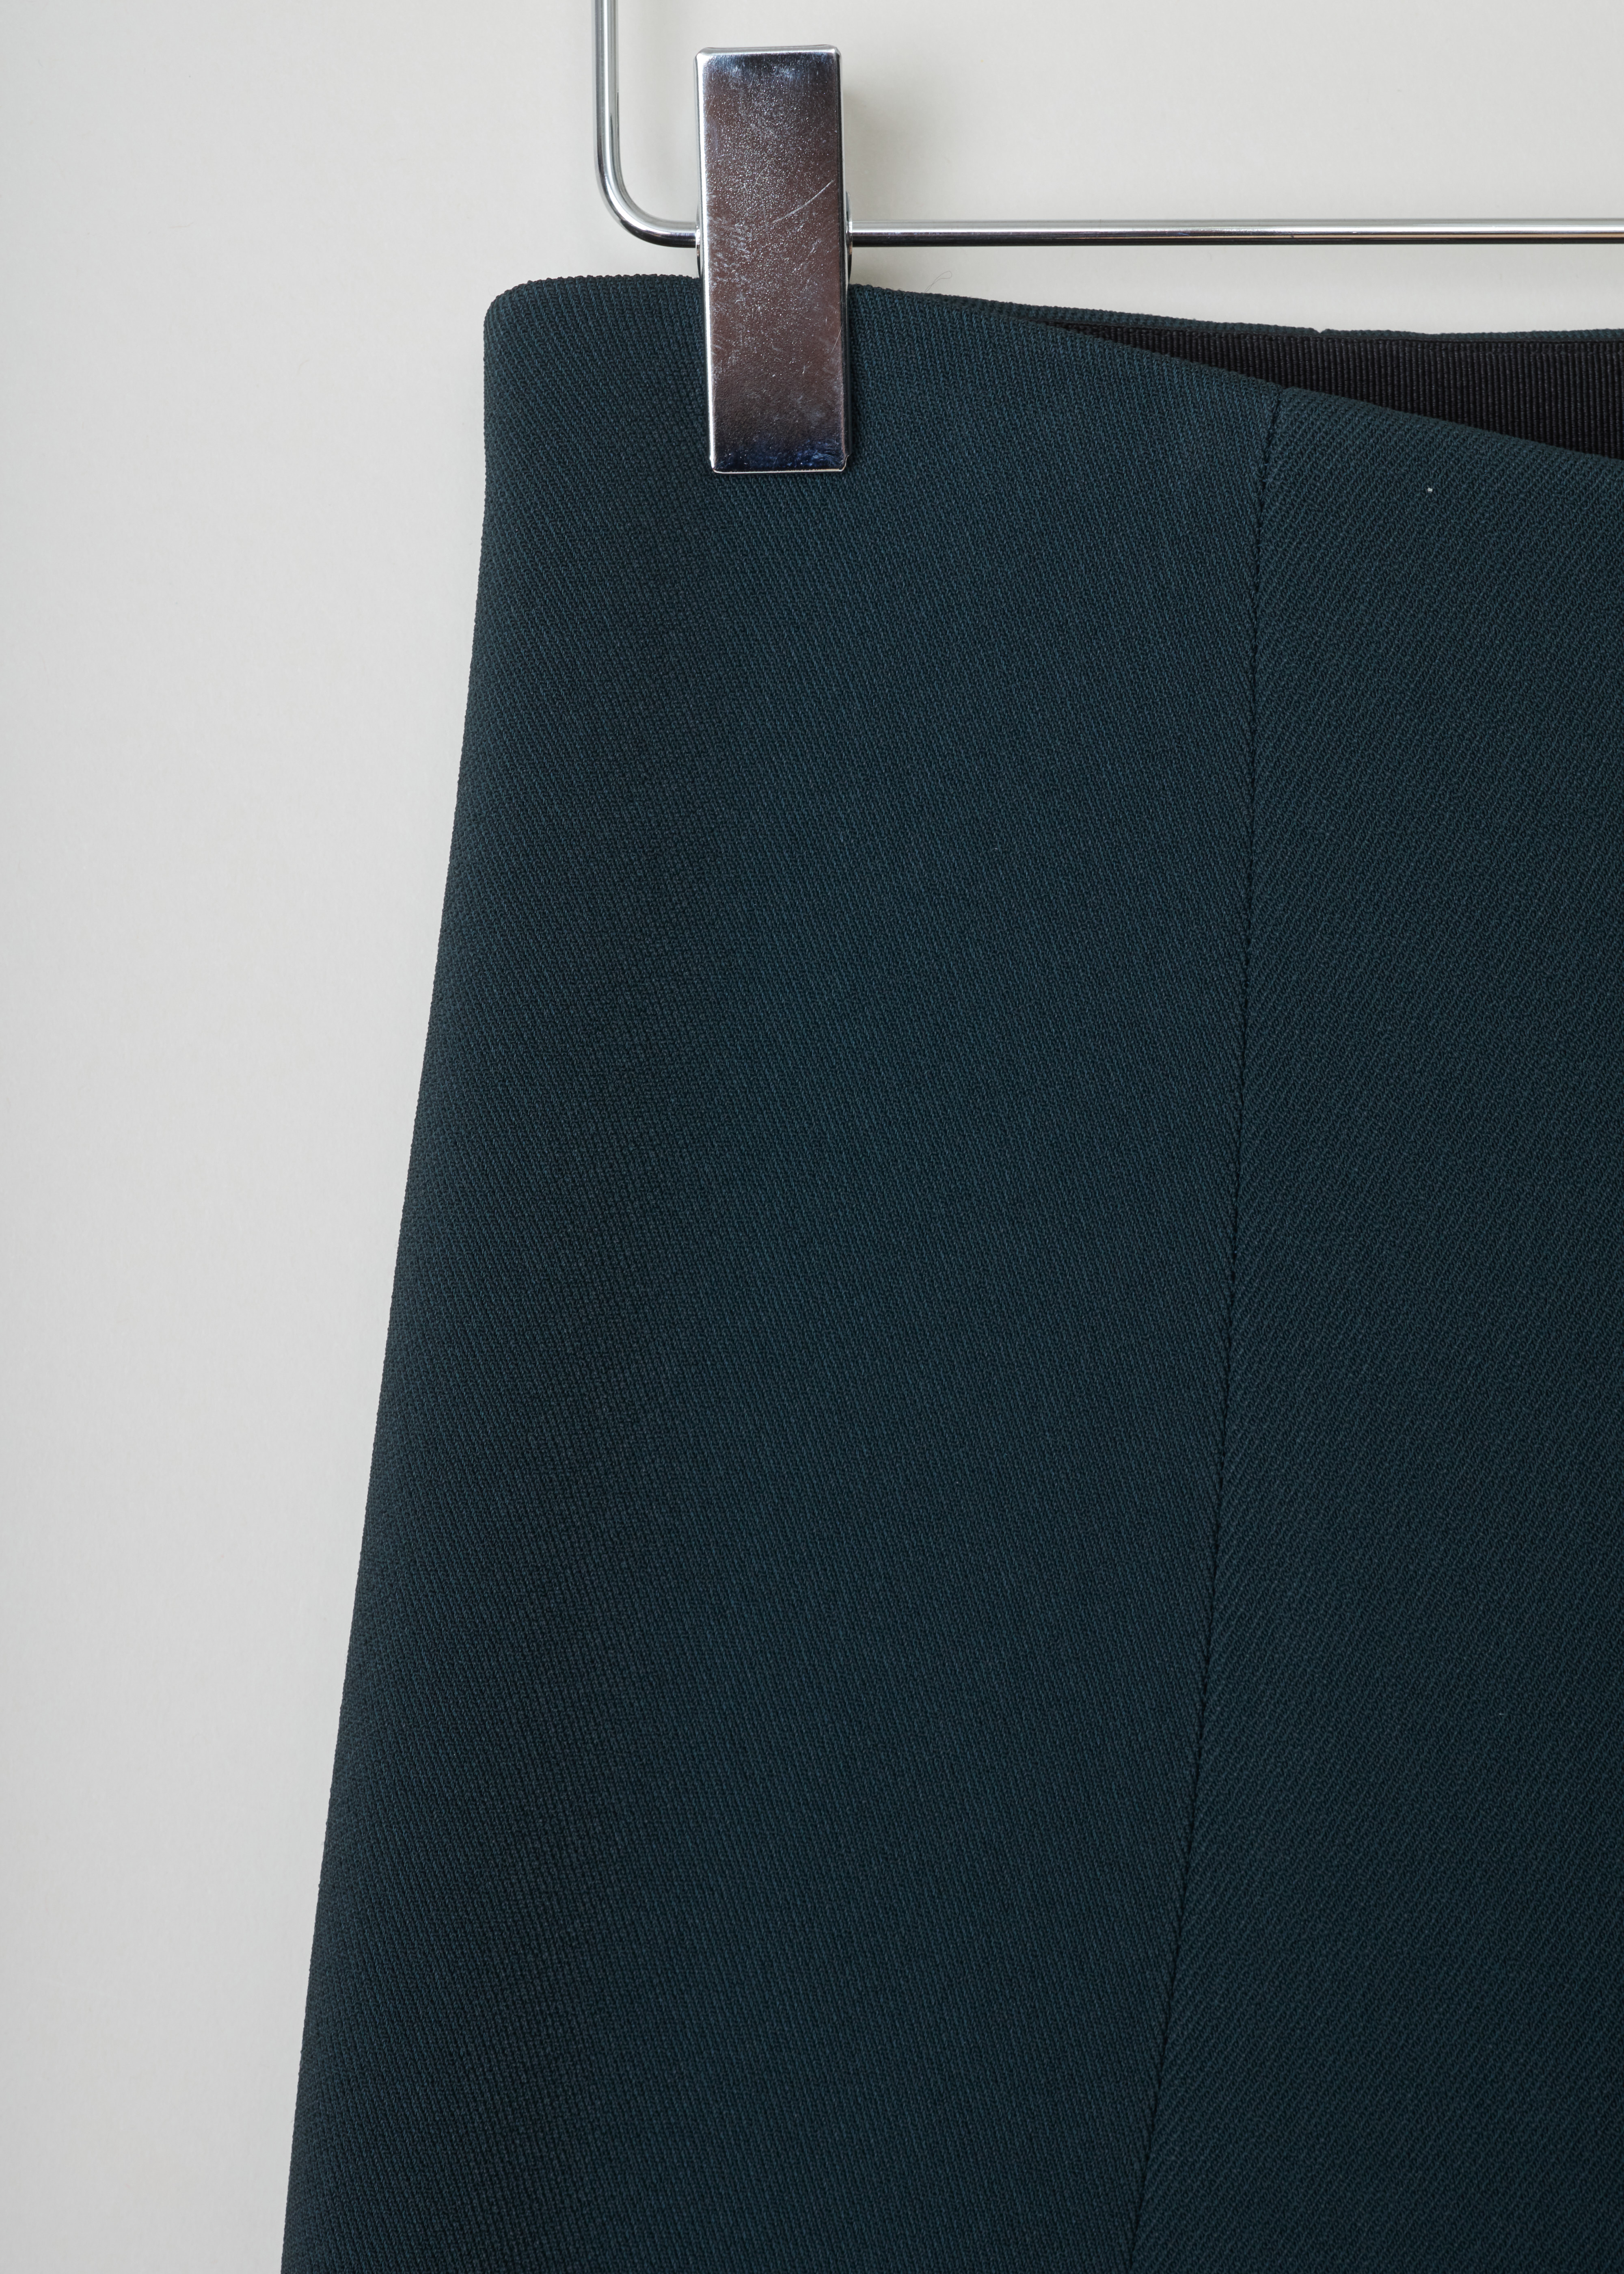 The Row Rona pant in dark green RONA_PANT_4435WI_I_38_DRK_PCCK_GRN detail. Straight fitted Rona pant with a high waist, an ankle length and an invisible zipper fastening on the side.